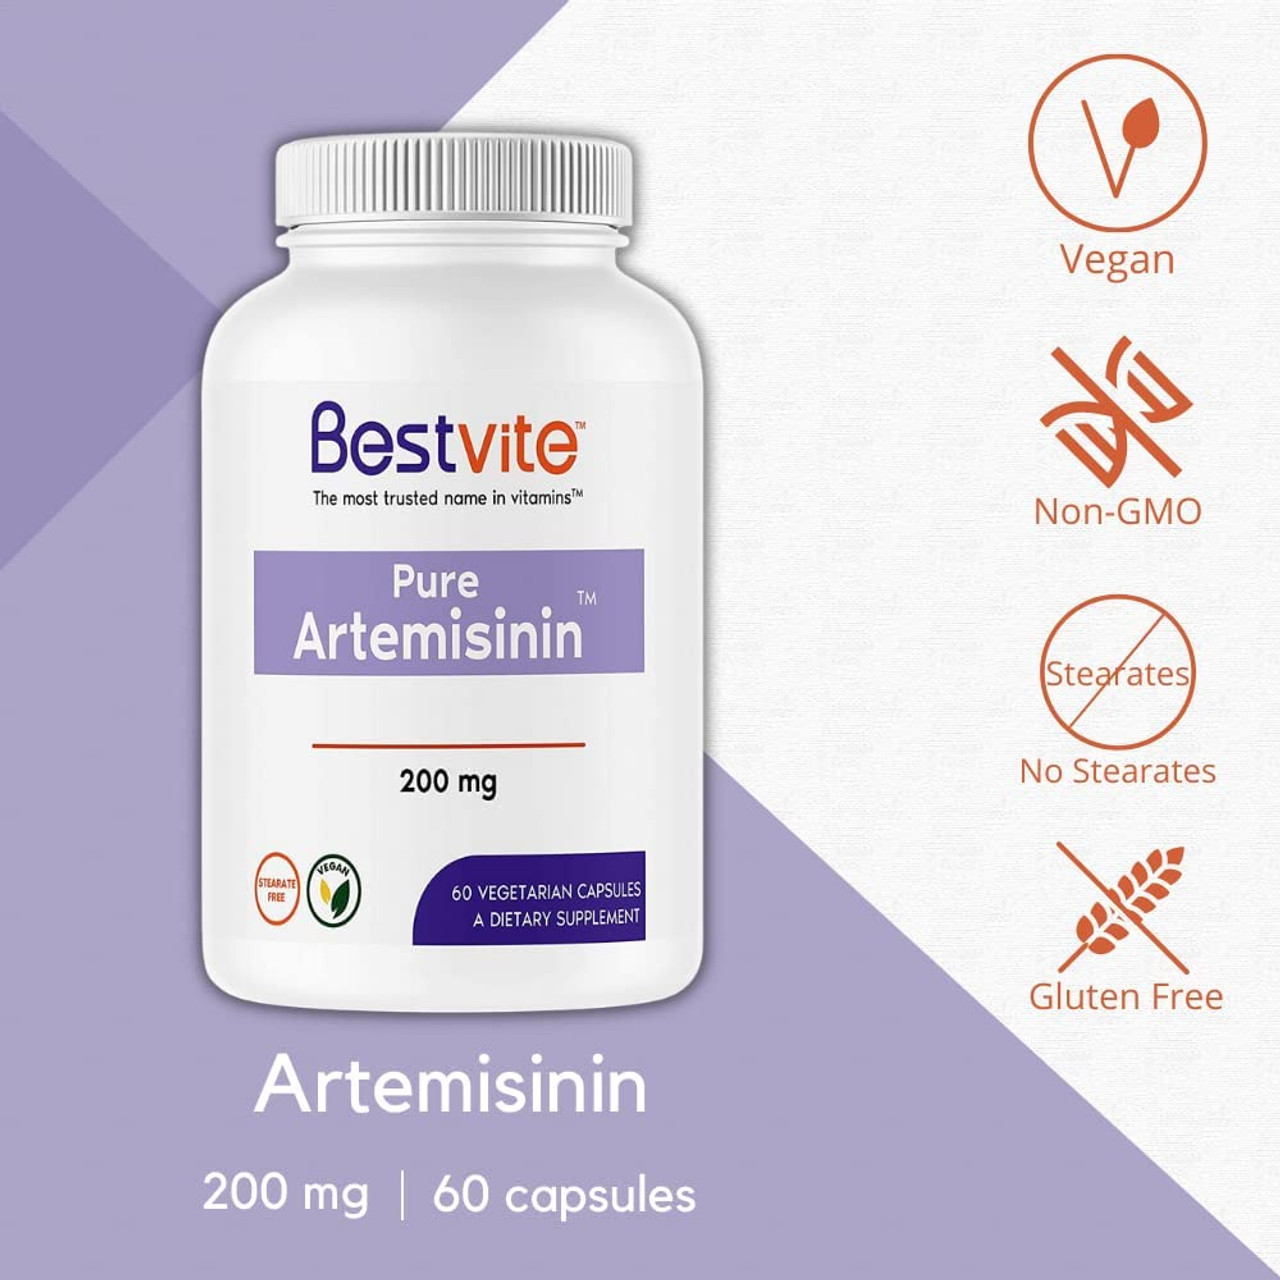 Artemisinin 500 mg - Supports Healthy Aging, Digestion, and Immunity - USA  Third Party Tested - Vegan, Non-GMO - Artemisia Annua Supplement - Sweet